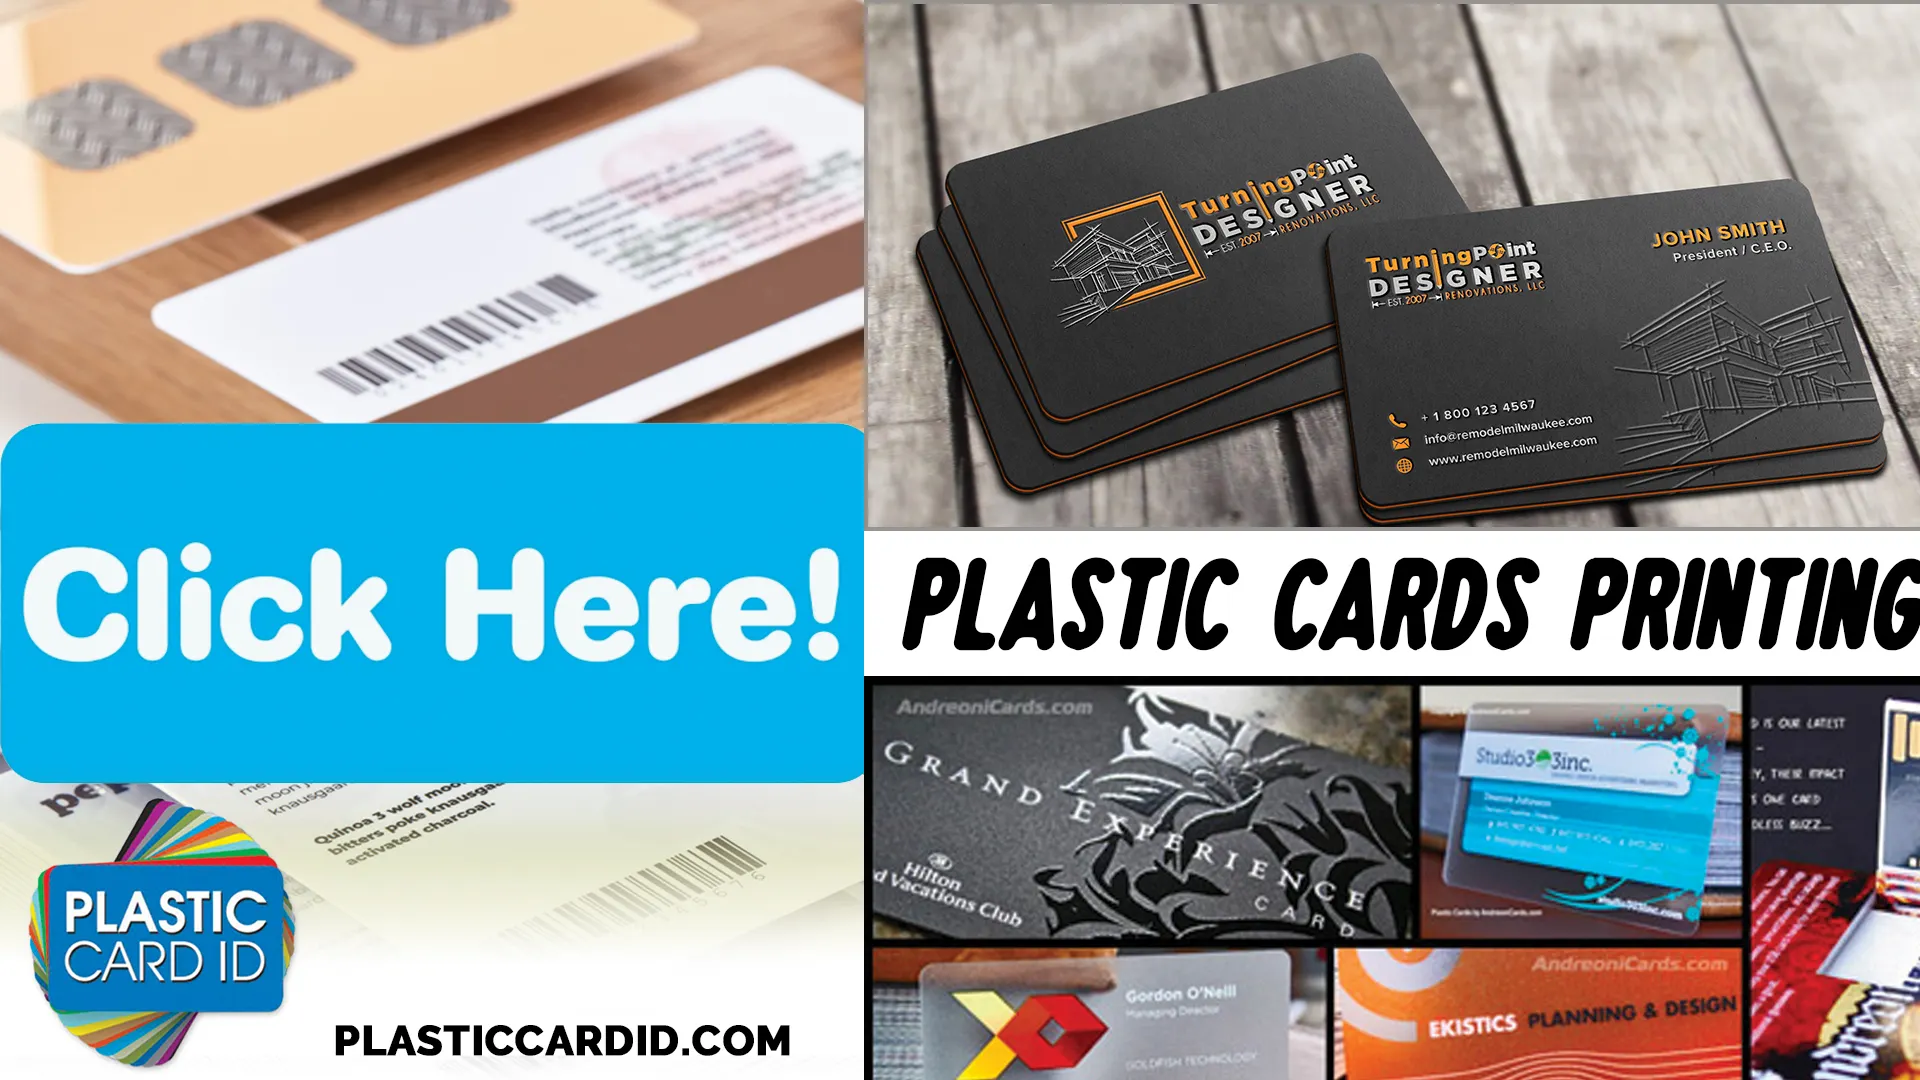 Understanding the Life Cycle of Your Plastic Cards